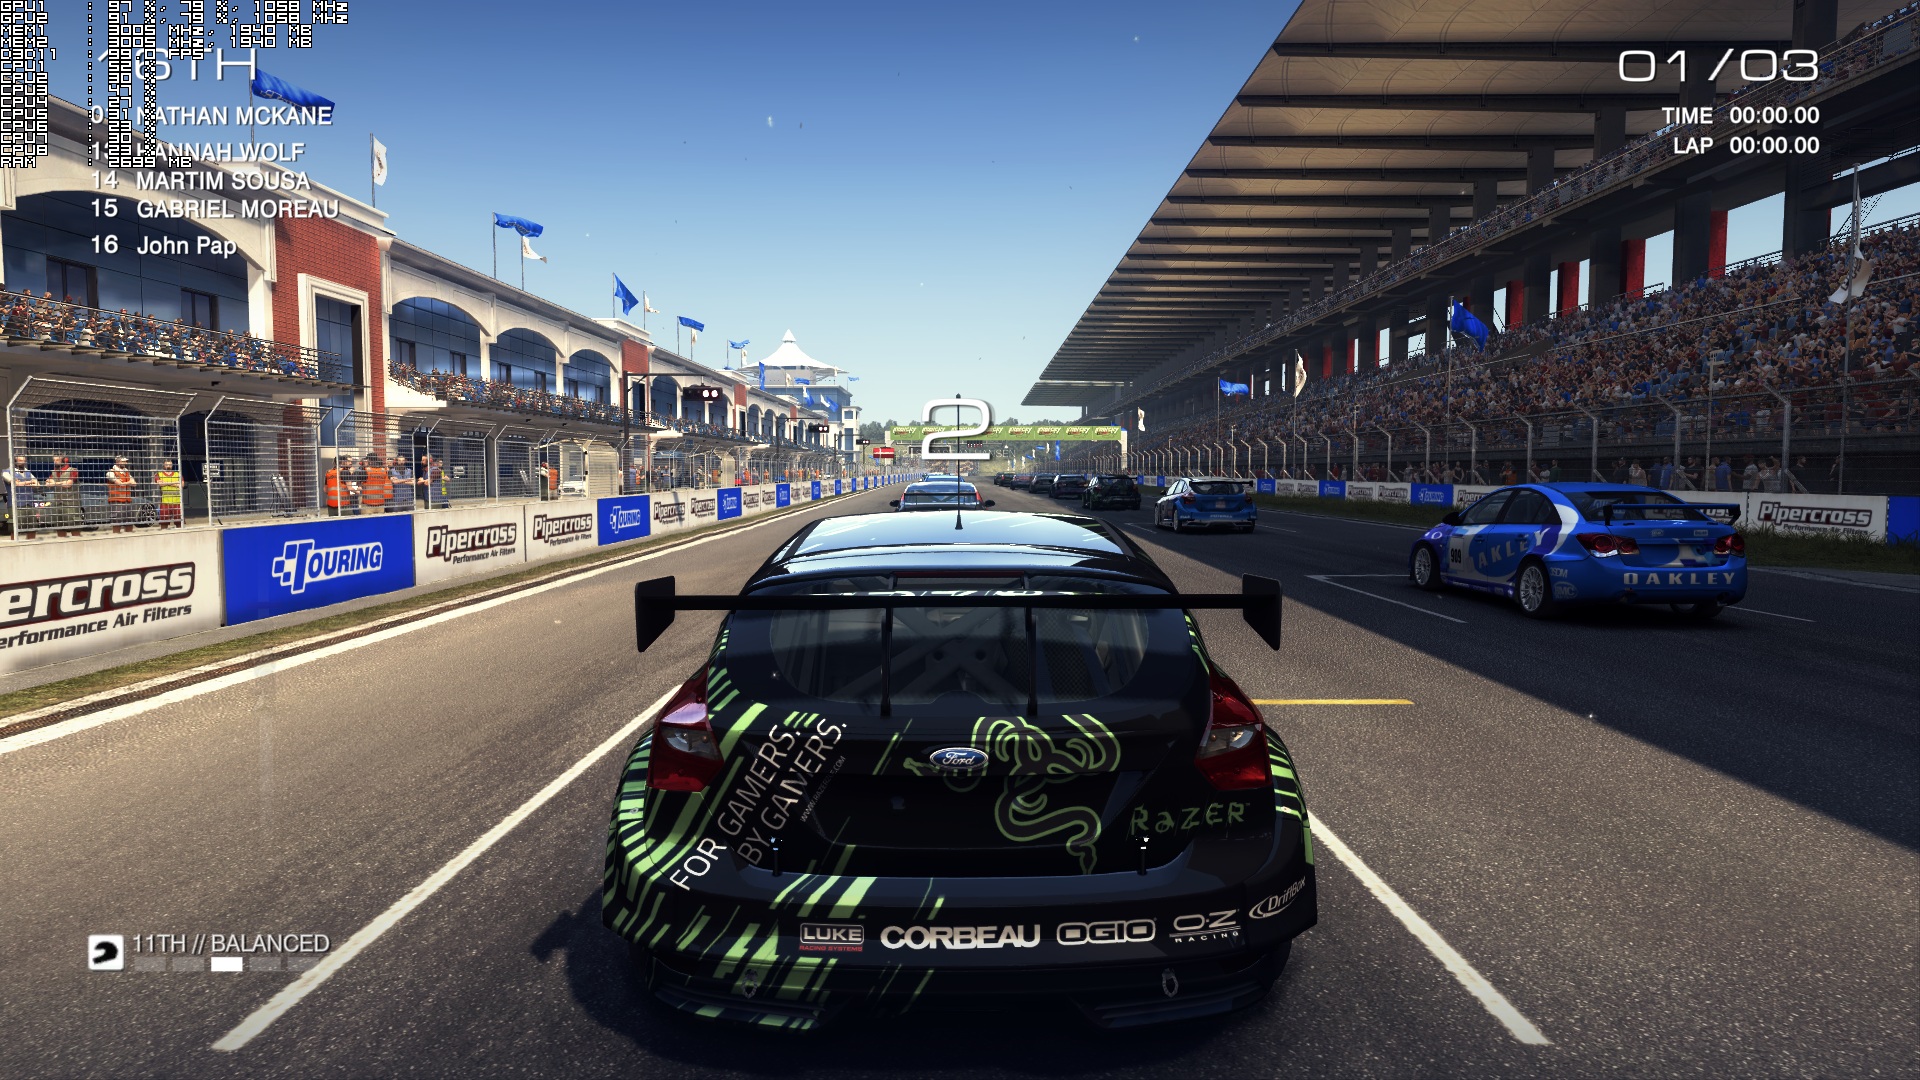 GRID: Autosport PC gameplay at 1080p max settings 